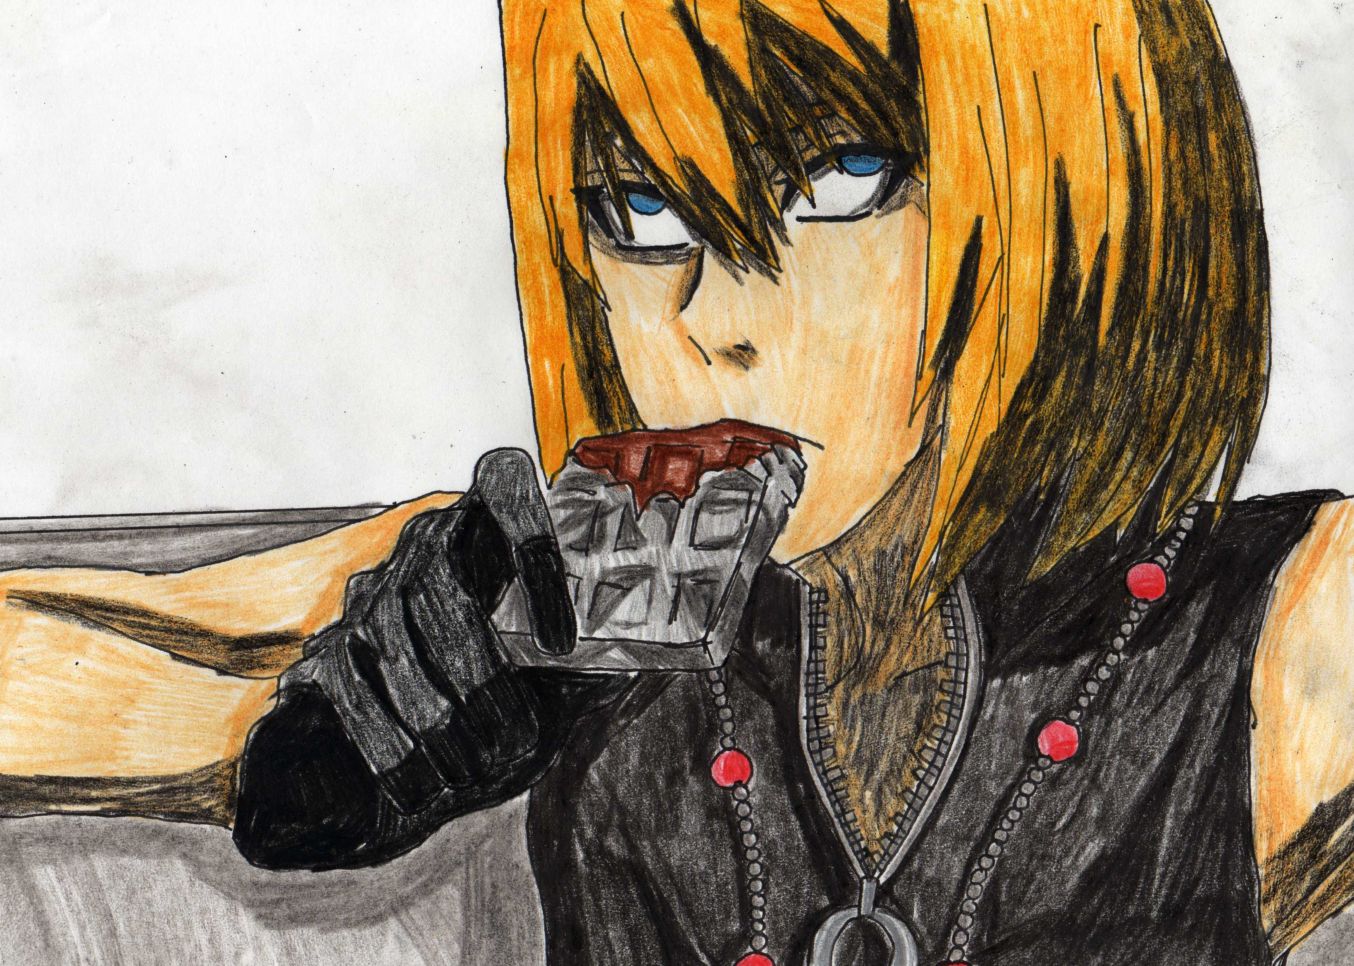 Mello by ladychaos